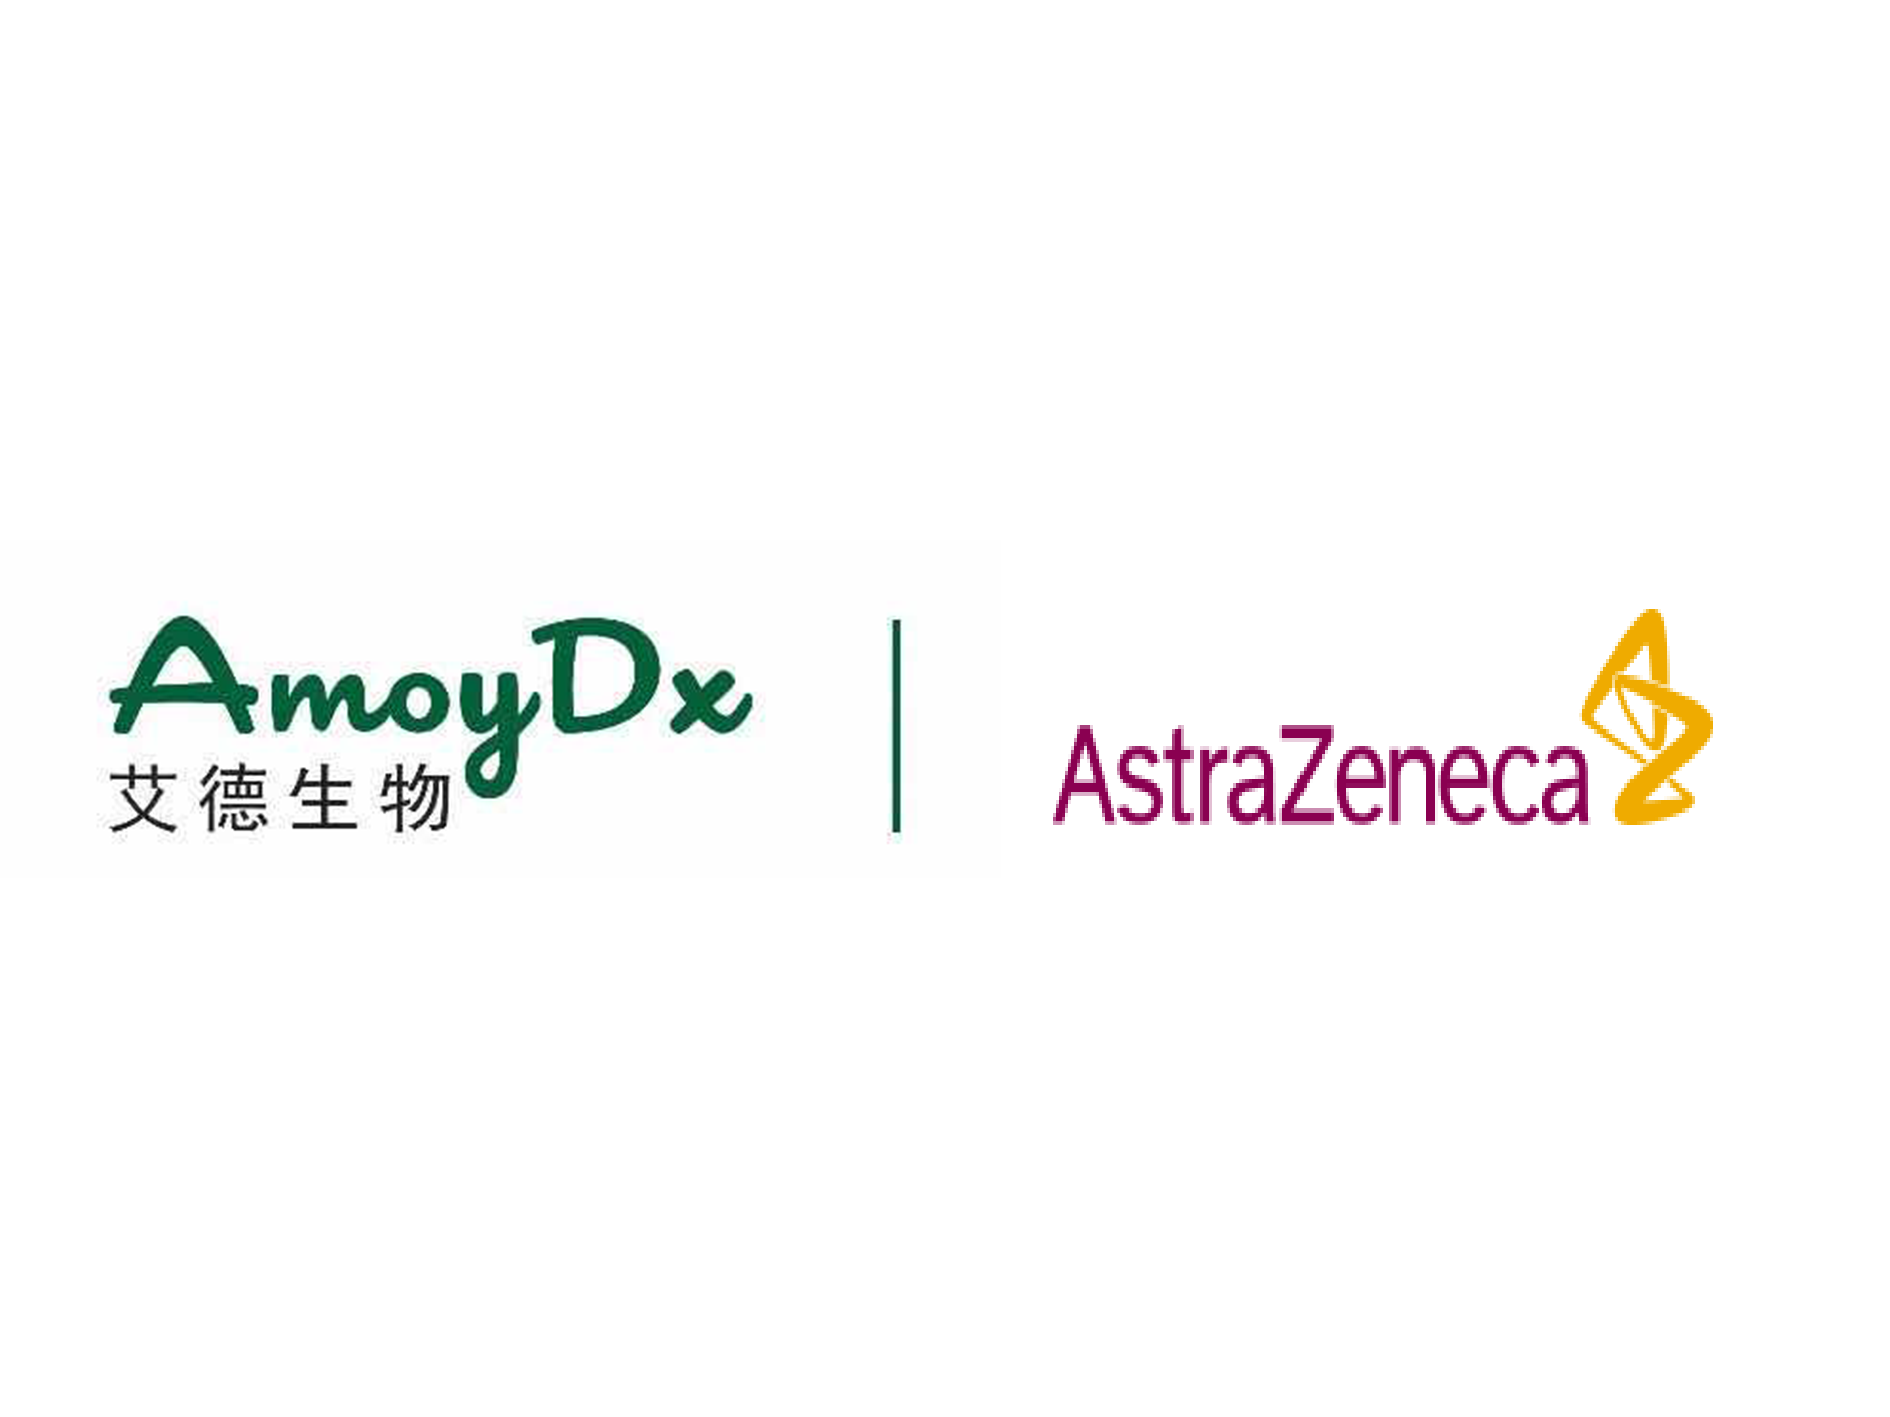 AmoyDx Signs Agreement with AstraZeneca to Cooperate in Cancer Diagnosis in China